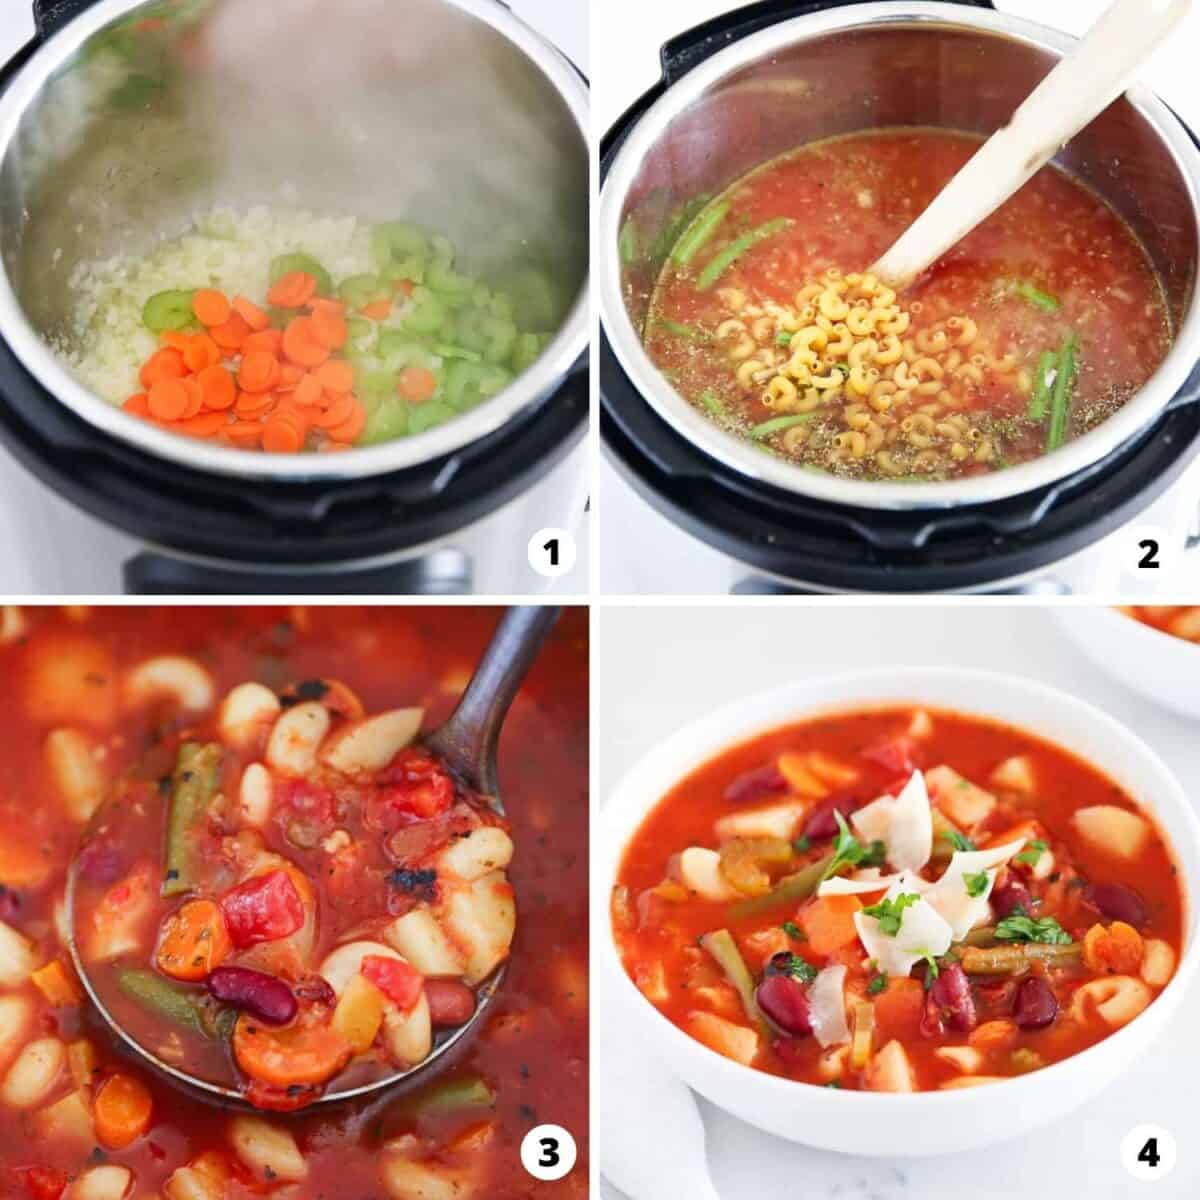 Showing how to make instant pot minestrone soup in a 4 step collage.